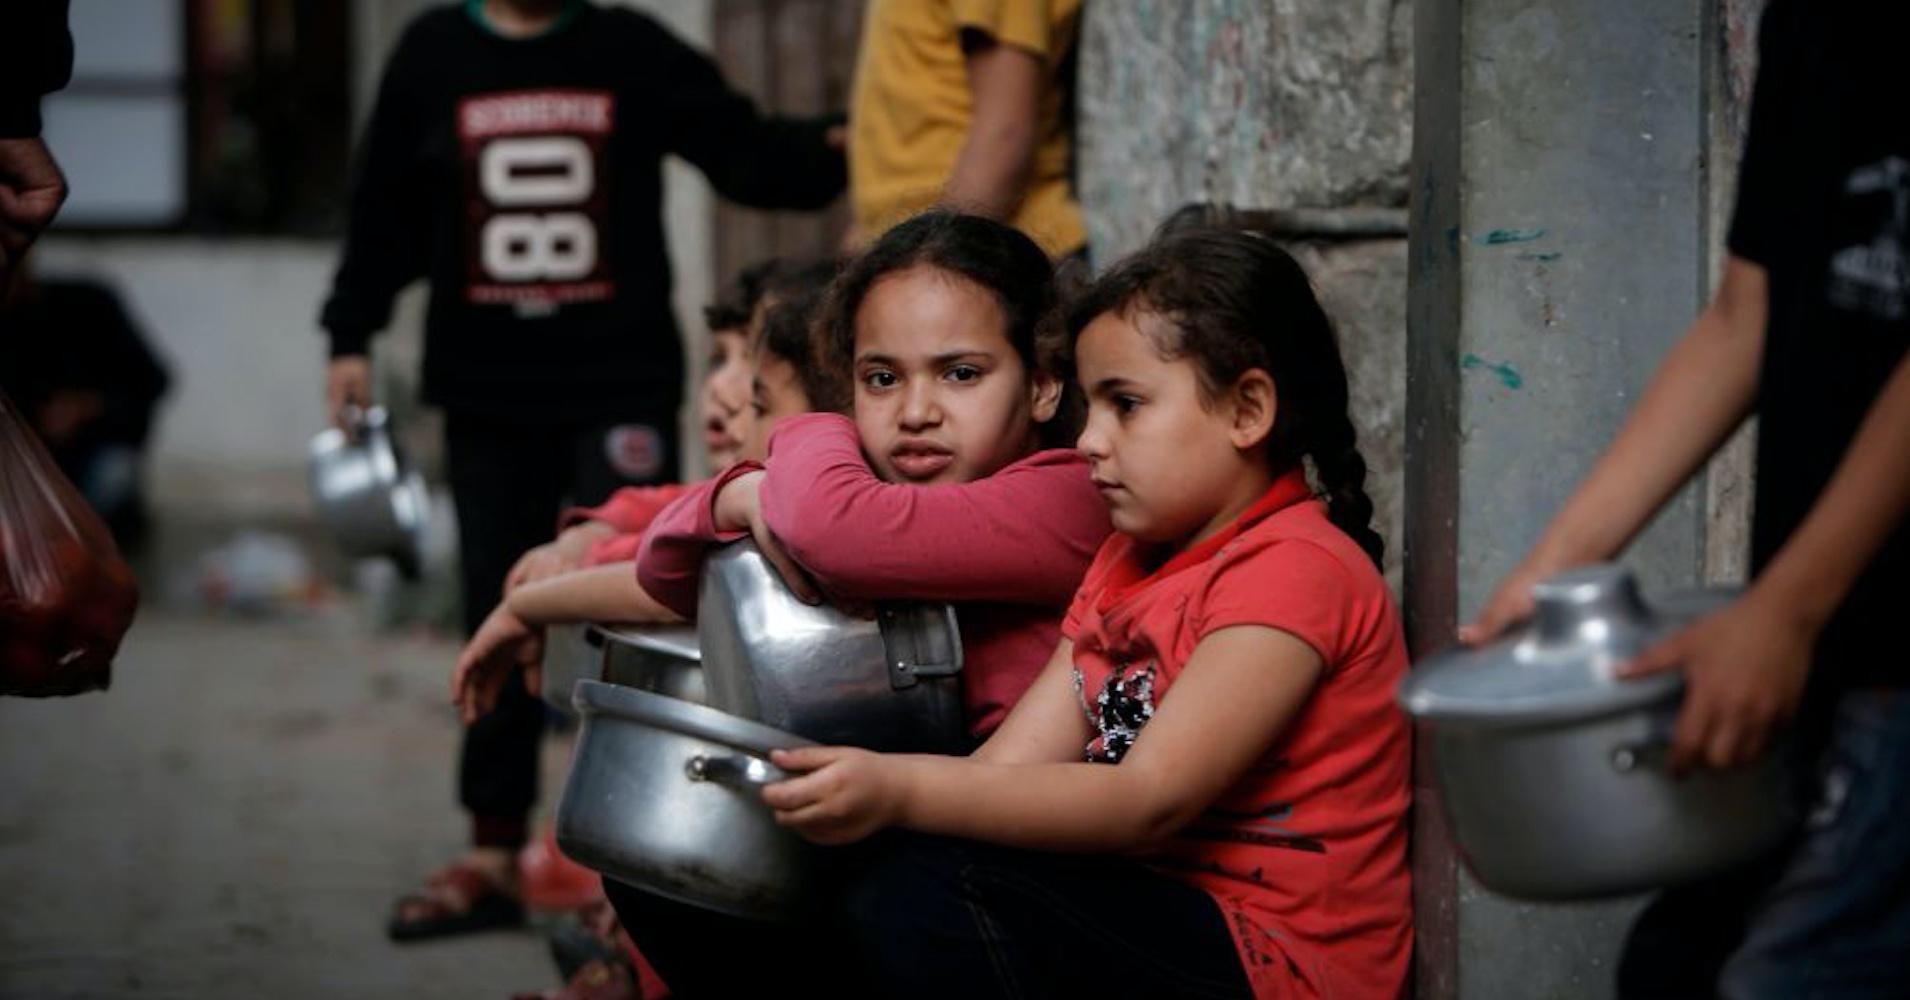 Palestinian children are among those waiting in line to receive food aid amid the Covid-19 pandemic in Gaza City, Palestine on April 24, 2020. (Photo: Mohammed Abed/AFP/Getty Images) 